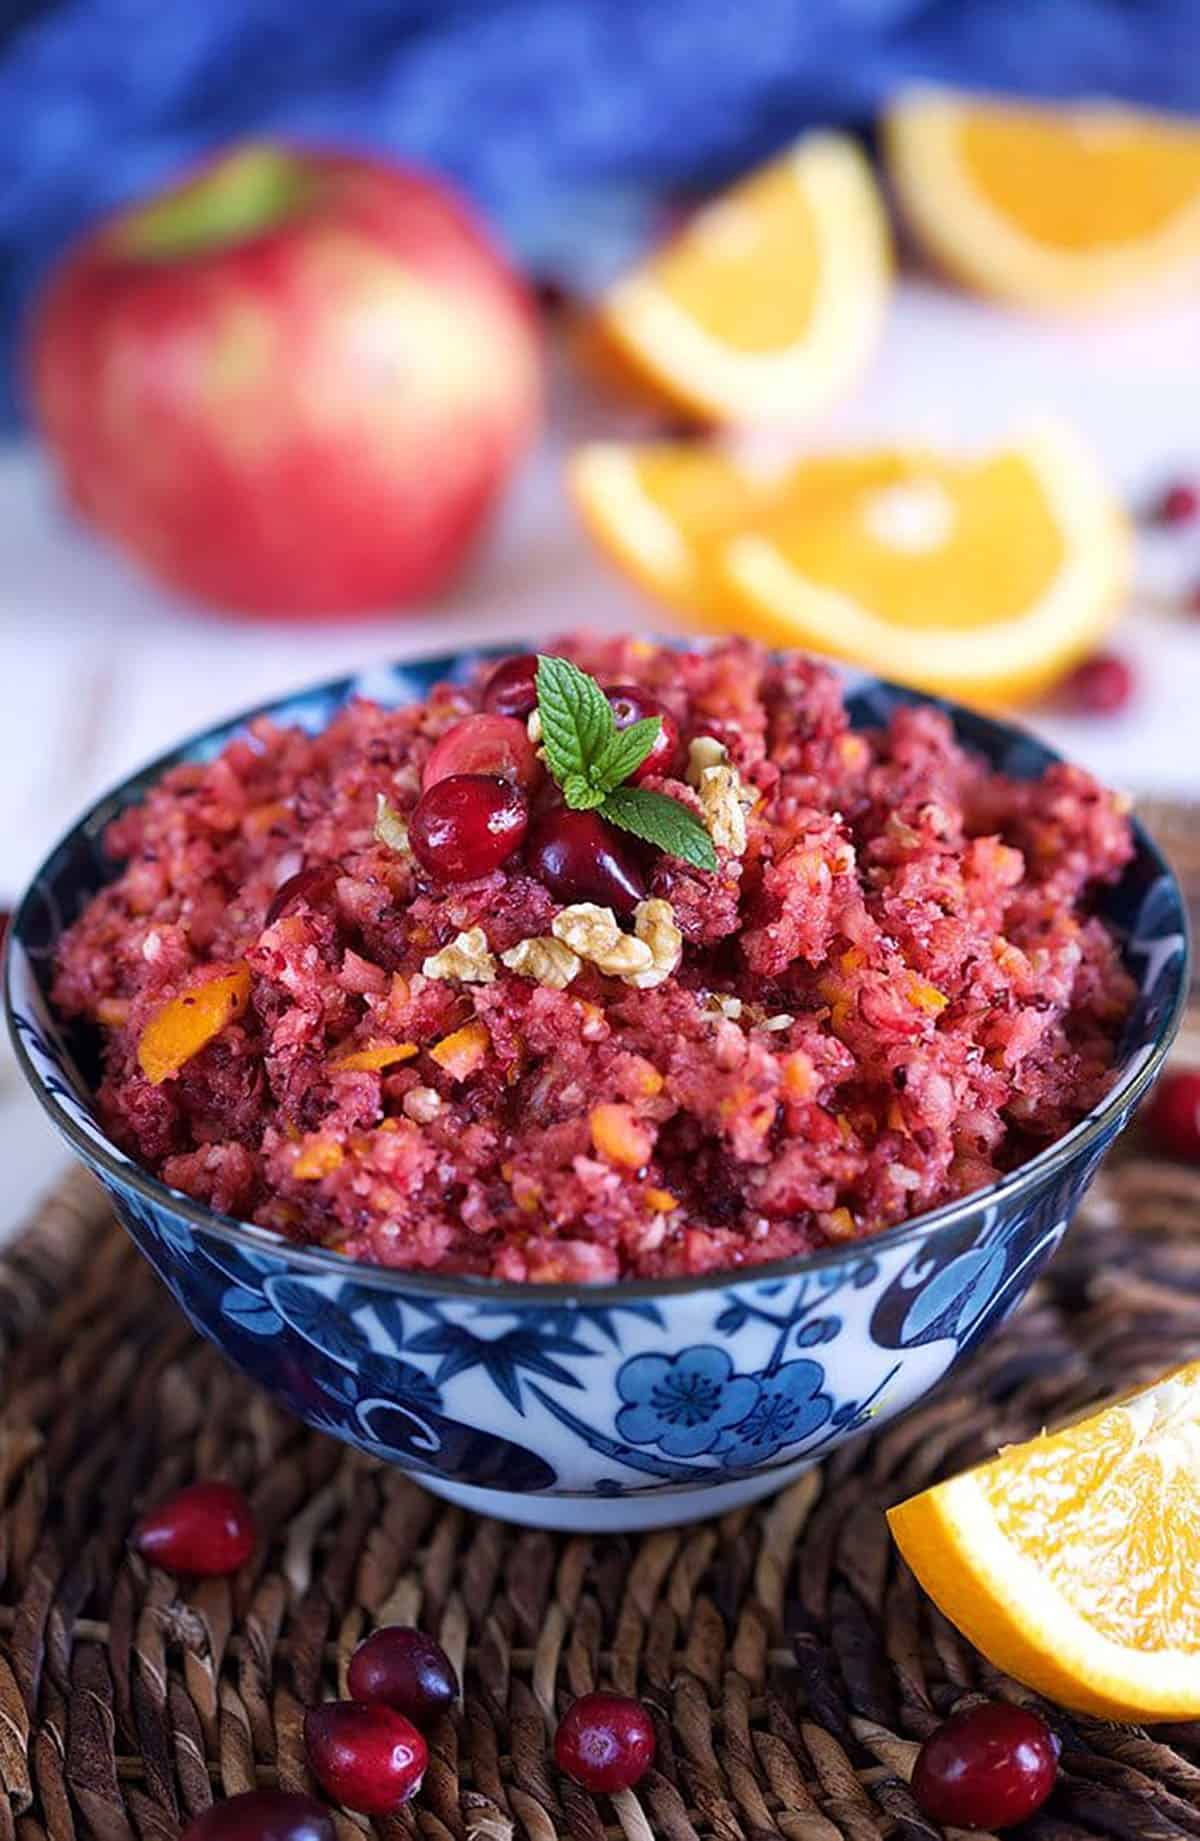 Cranberry orange relish in a blue and white bowl.